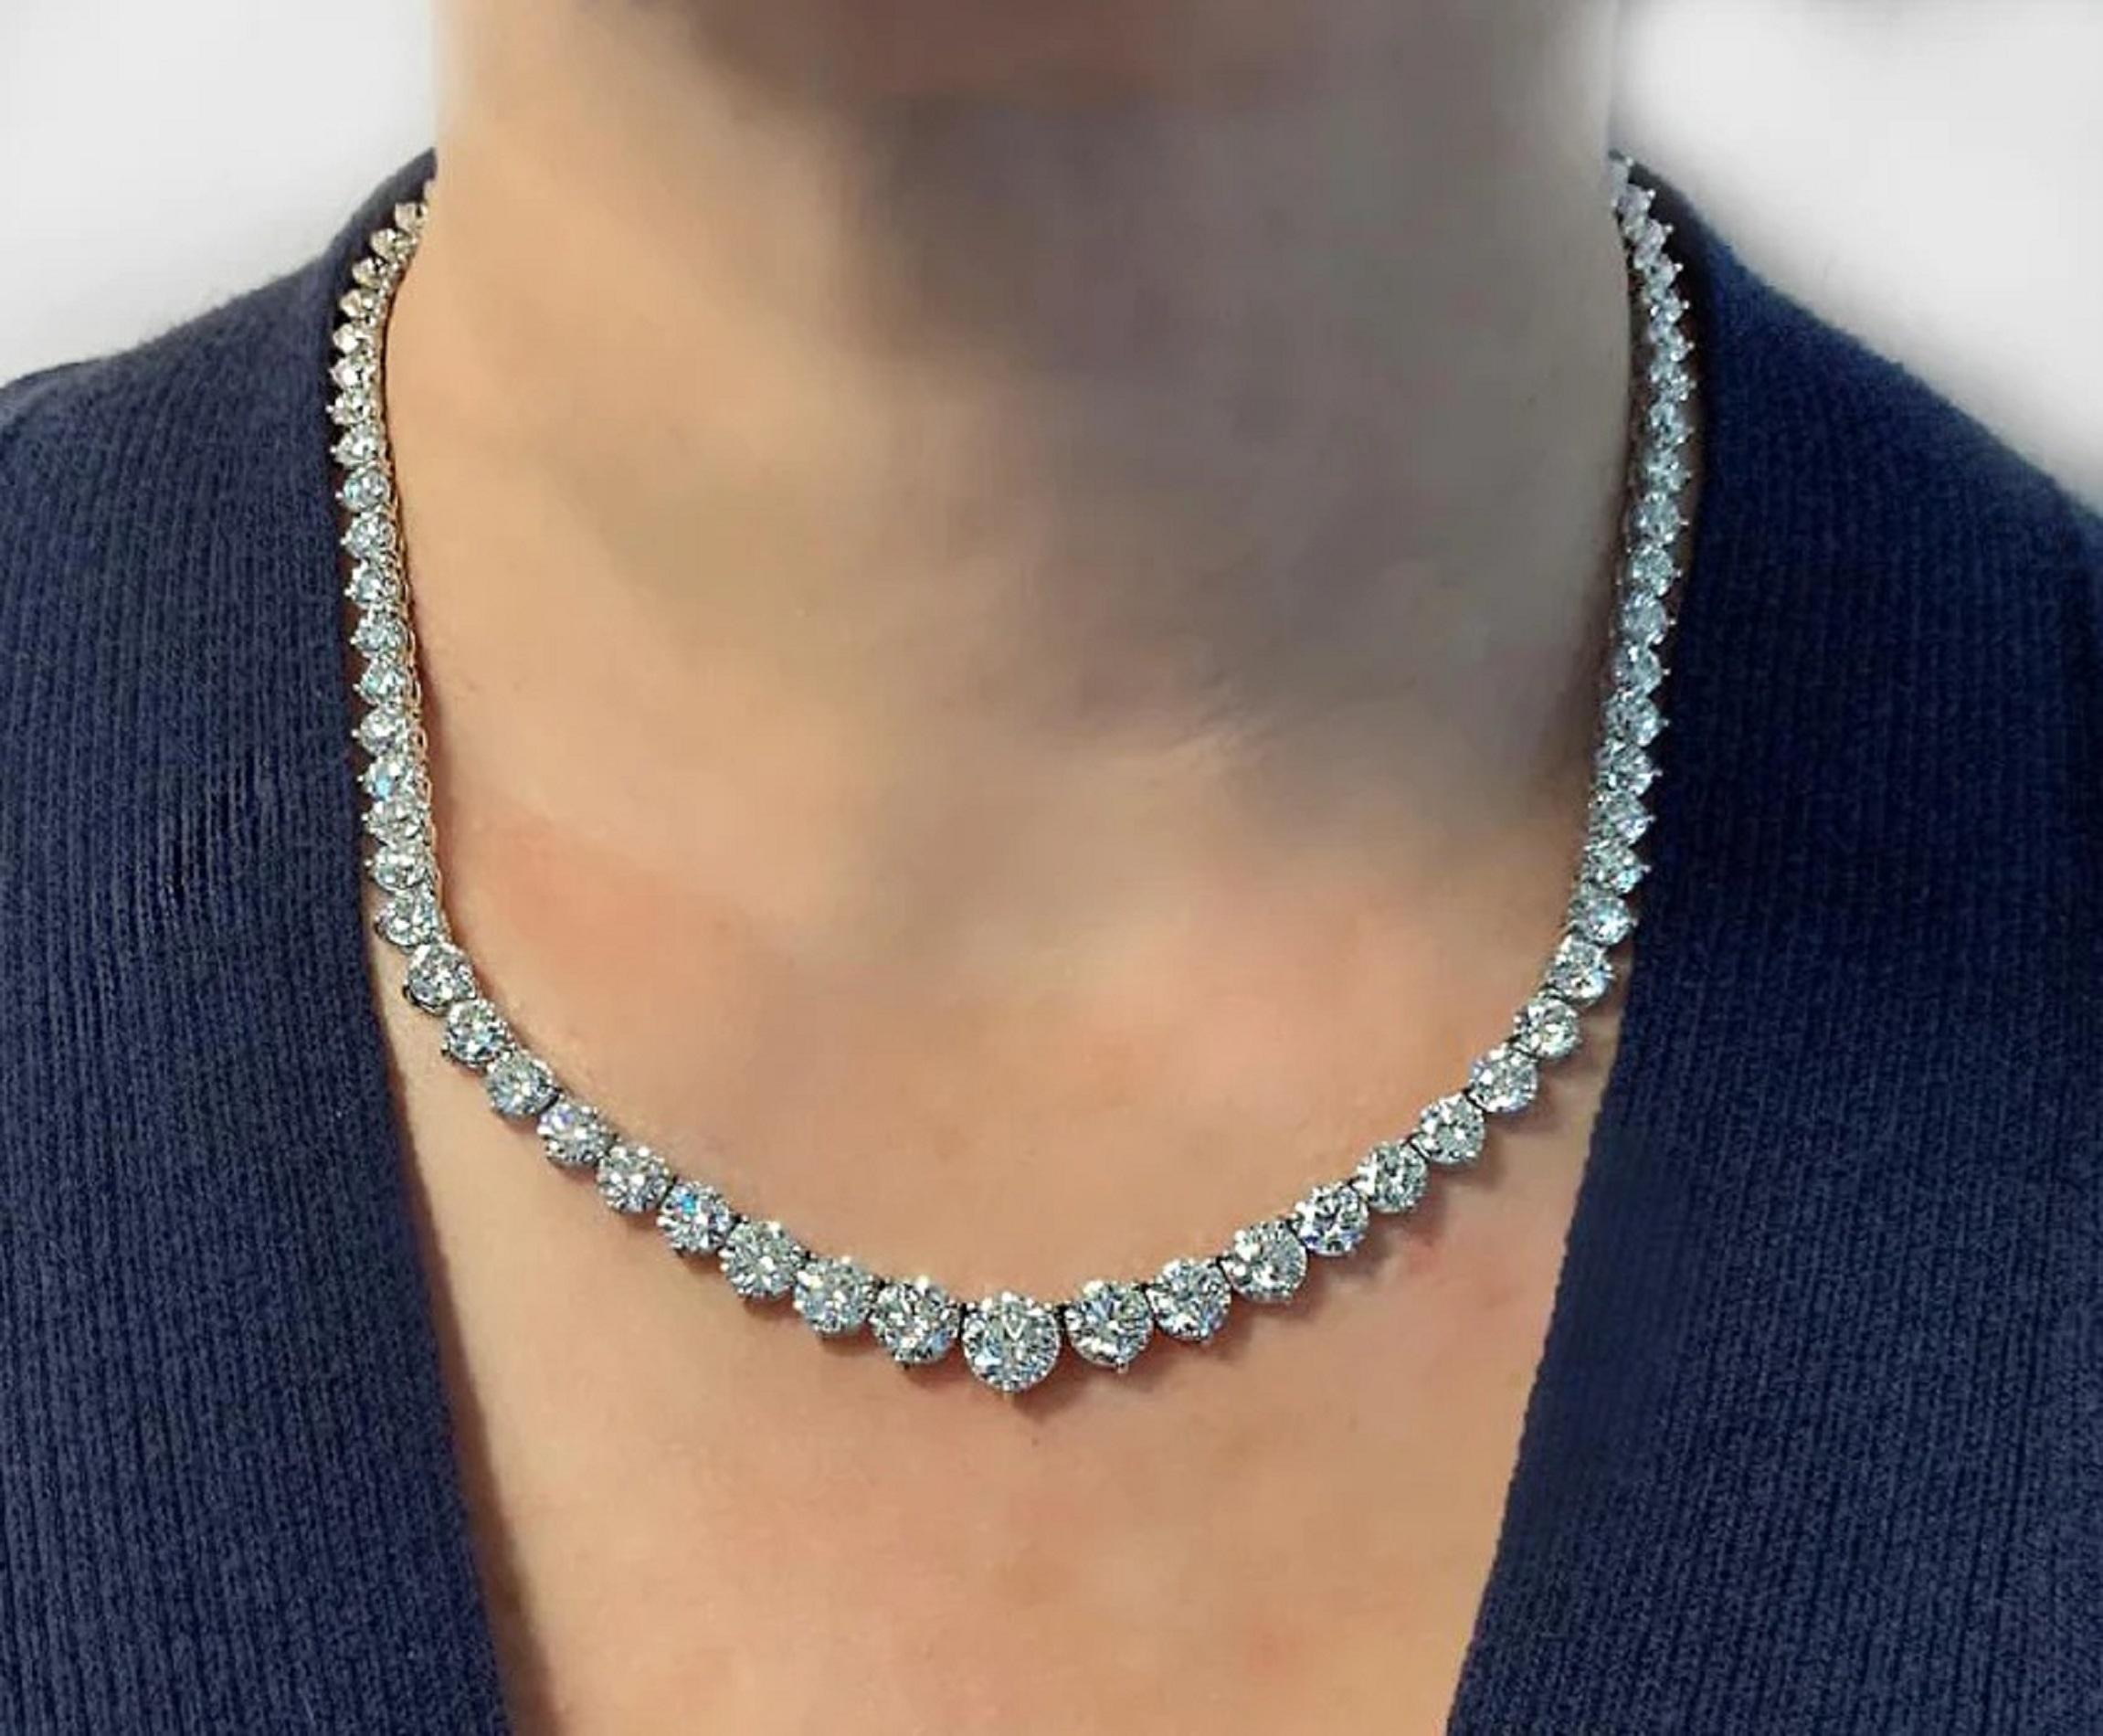 25 Carat Riviera Round Brilliant Cut Necklace 18 Carats White Gold In Excellent Condition For Sale In Rome, IT